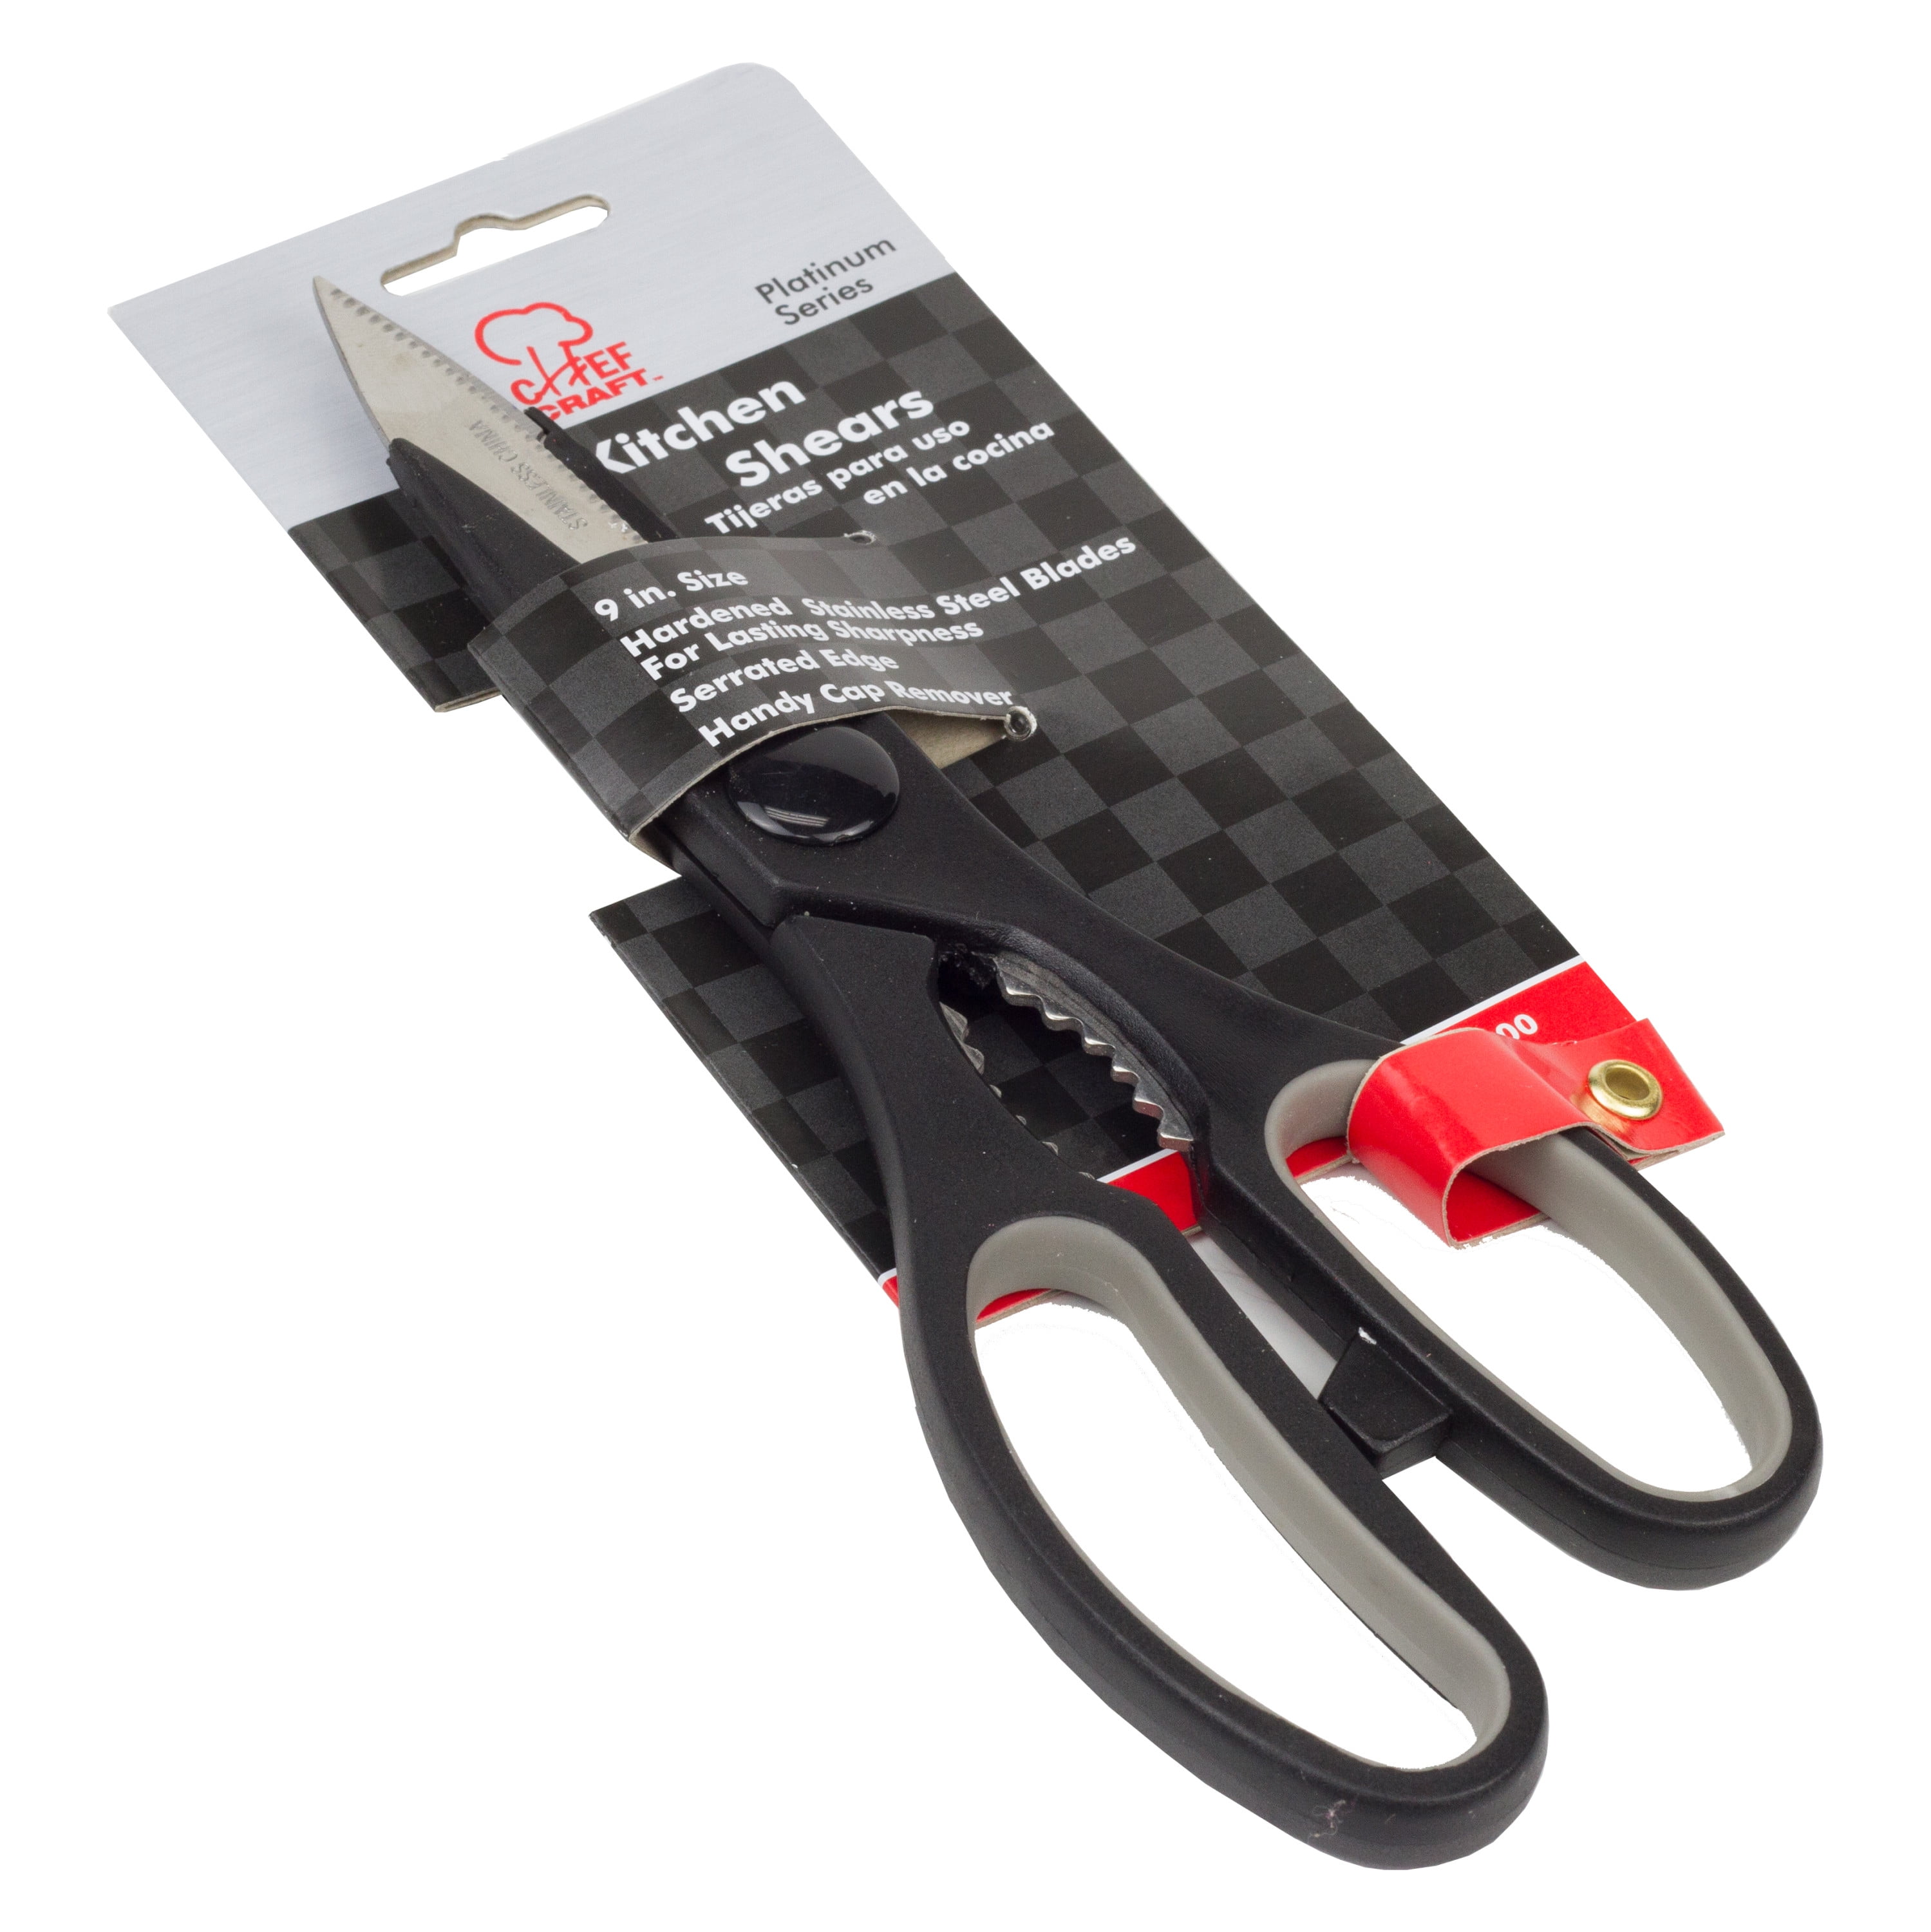 Chef's Choice Professional Game Shears